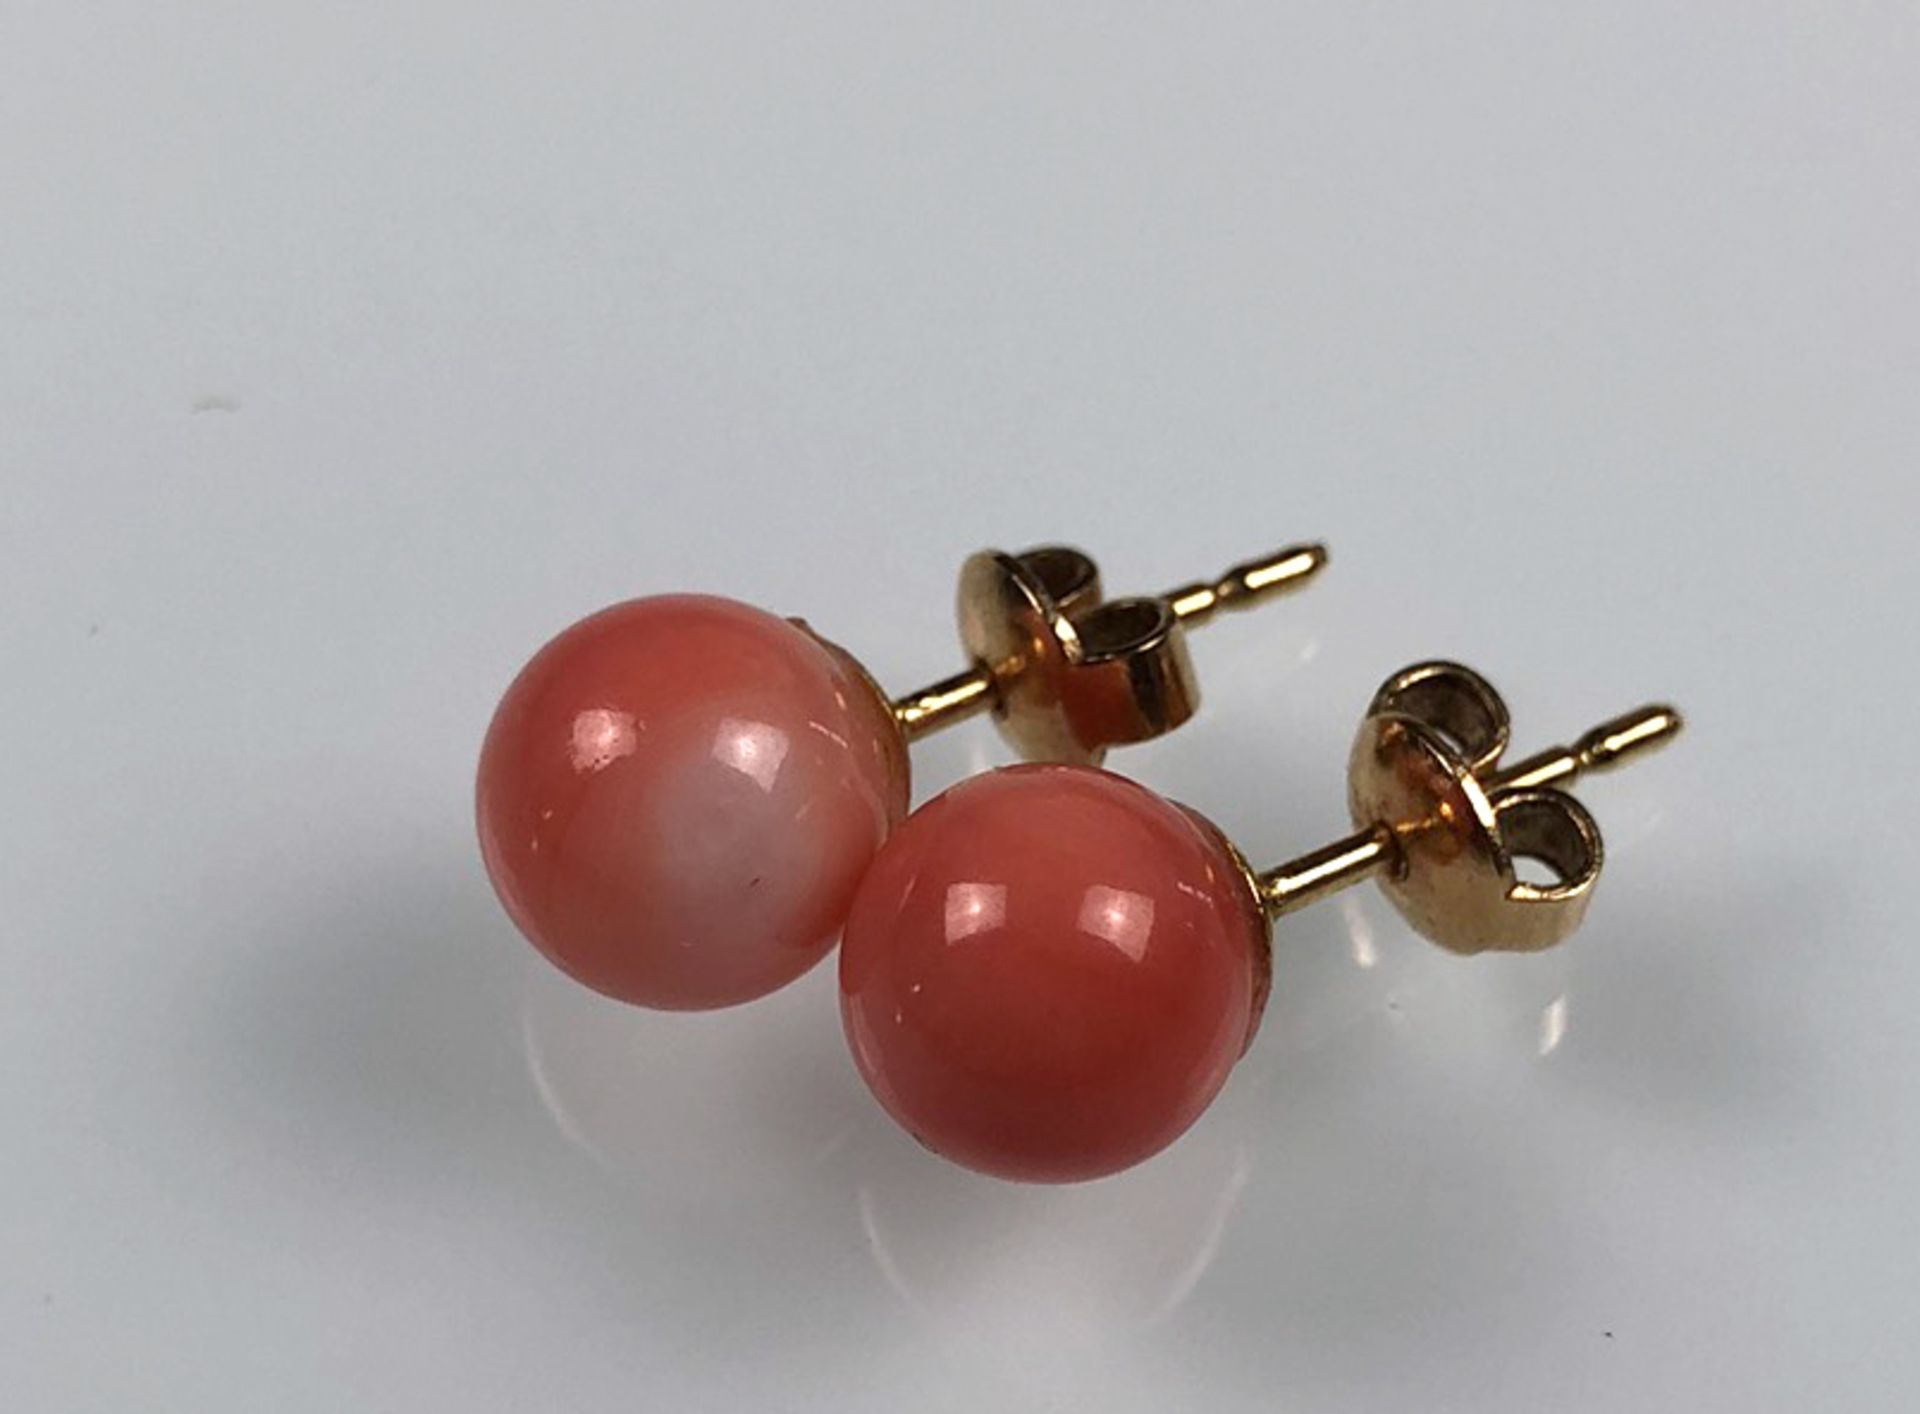 Collier und Ohrstecker. Koralle. Gold 750.Circa 44 cm lang.Necklace and ear studs. Coral. Gold 750. - Image 3 of 8